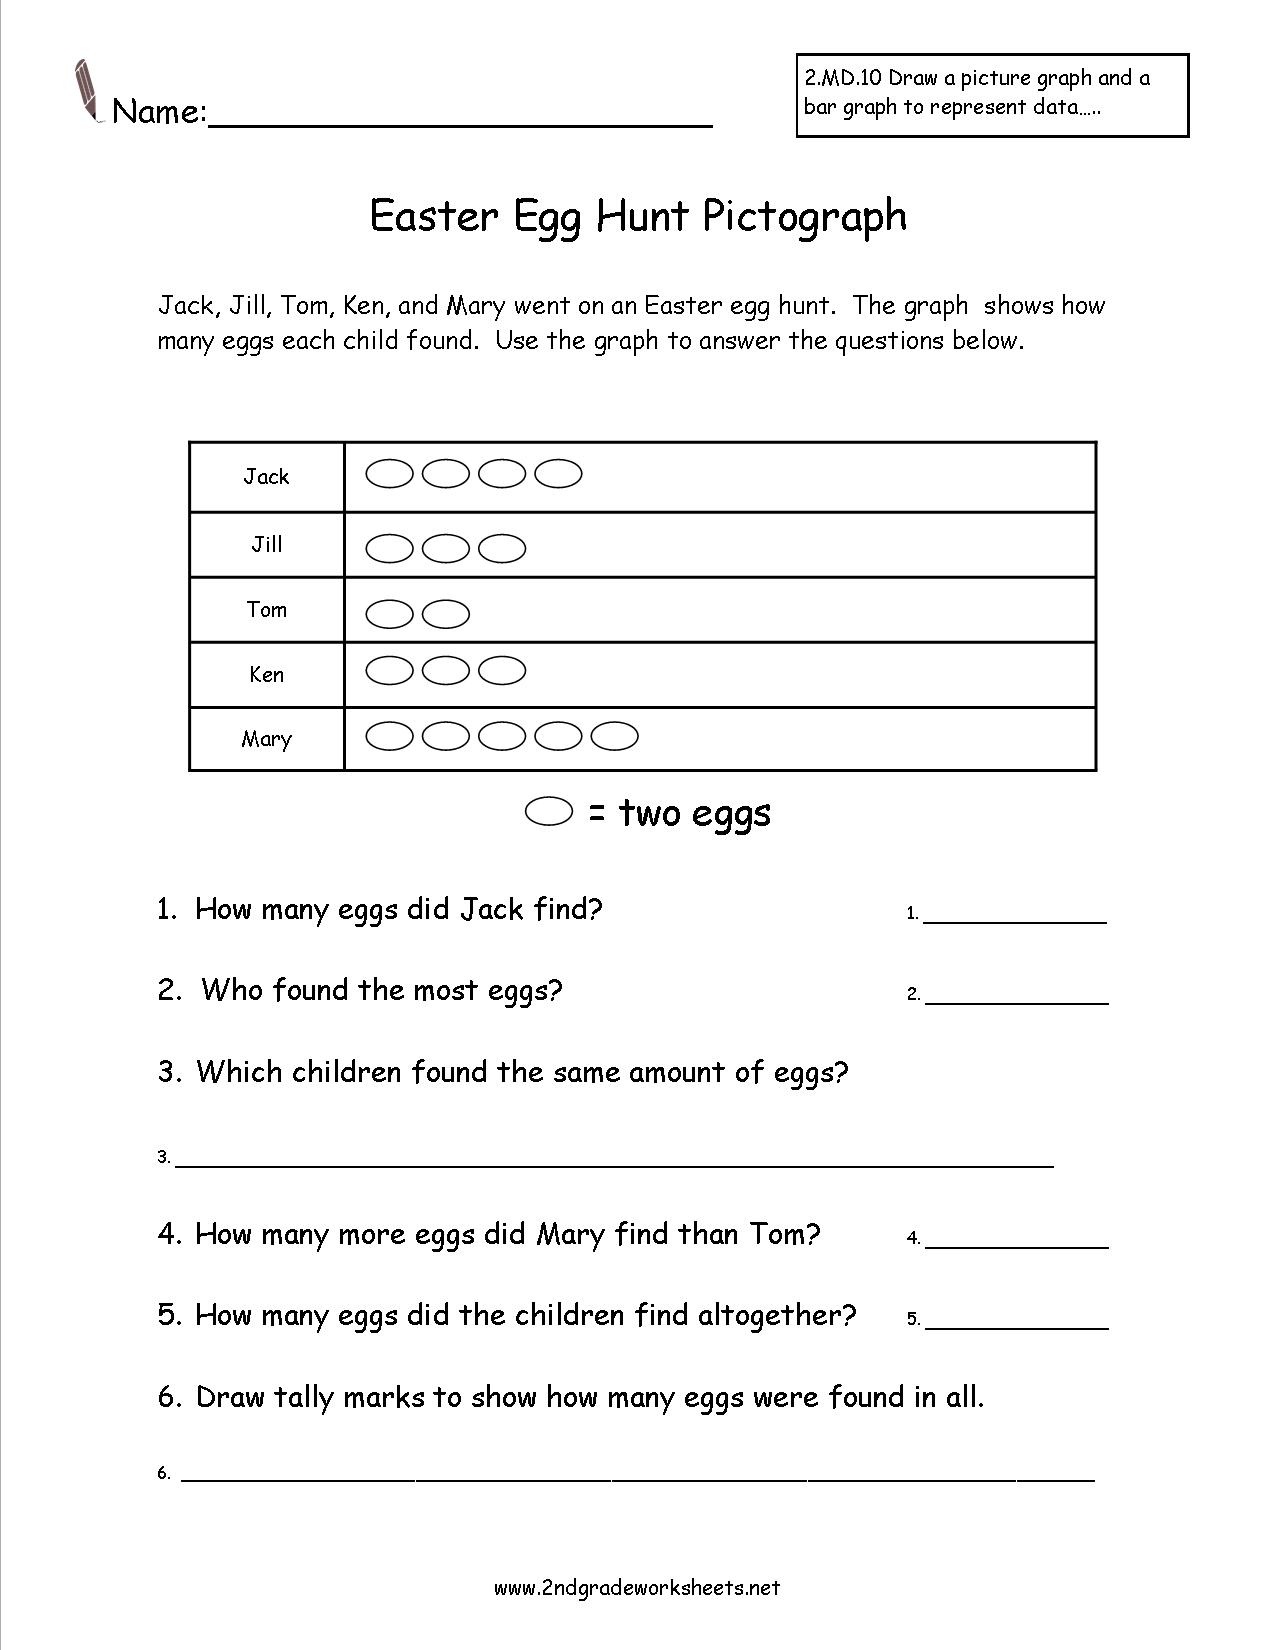 Second Grade Reading And Creating Pictograph Worksheets - Free Printable Science Worksheets For 2Nd Grade